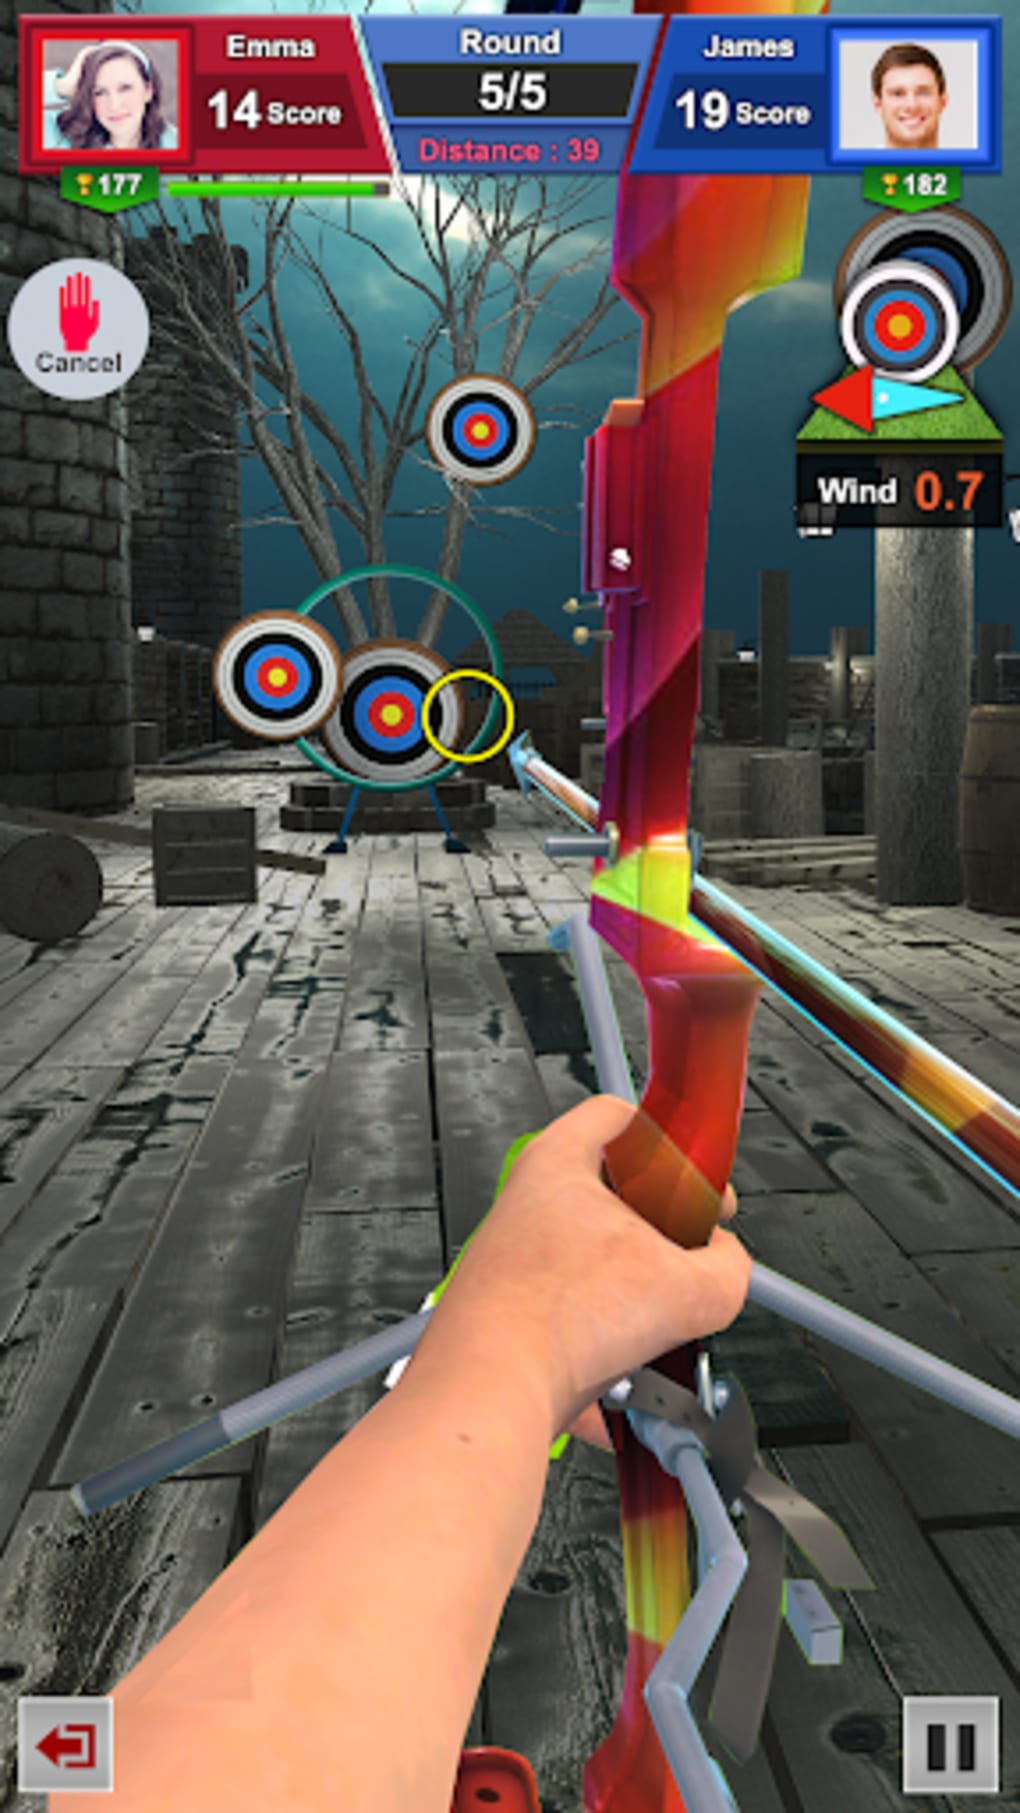 Archery Games Bow and Arrow for Android